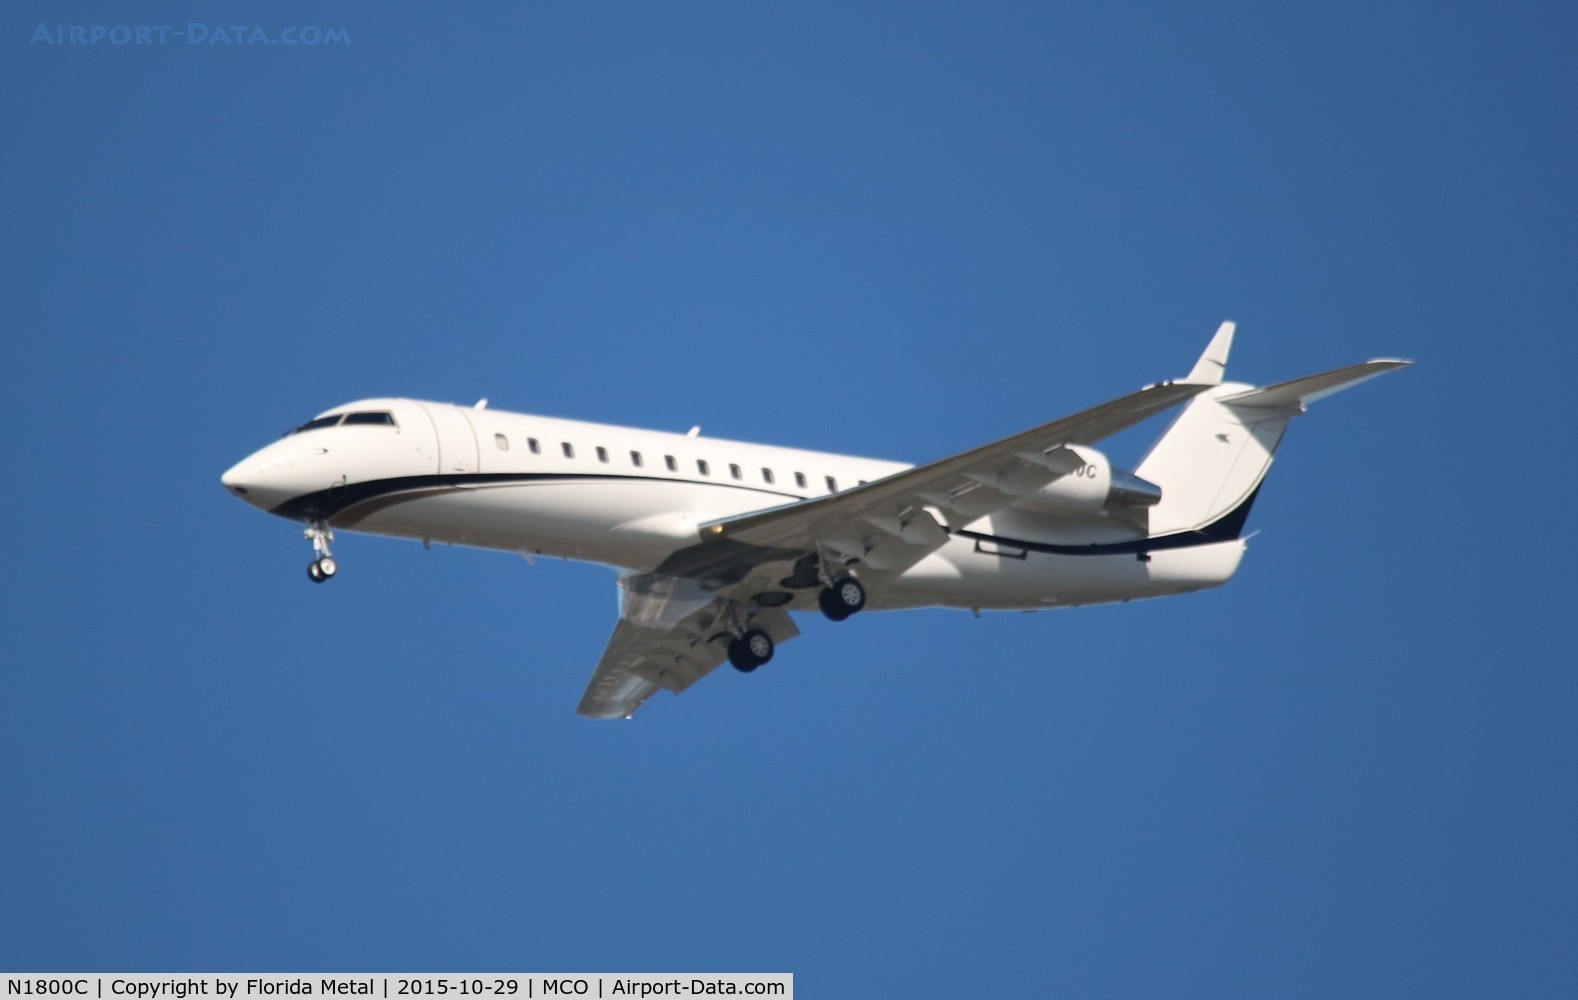 N1800C, 1999 Bombardier Challenger 601-3A (CL-600-2B16) C/N 7351, Challenger 850